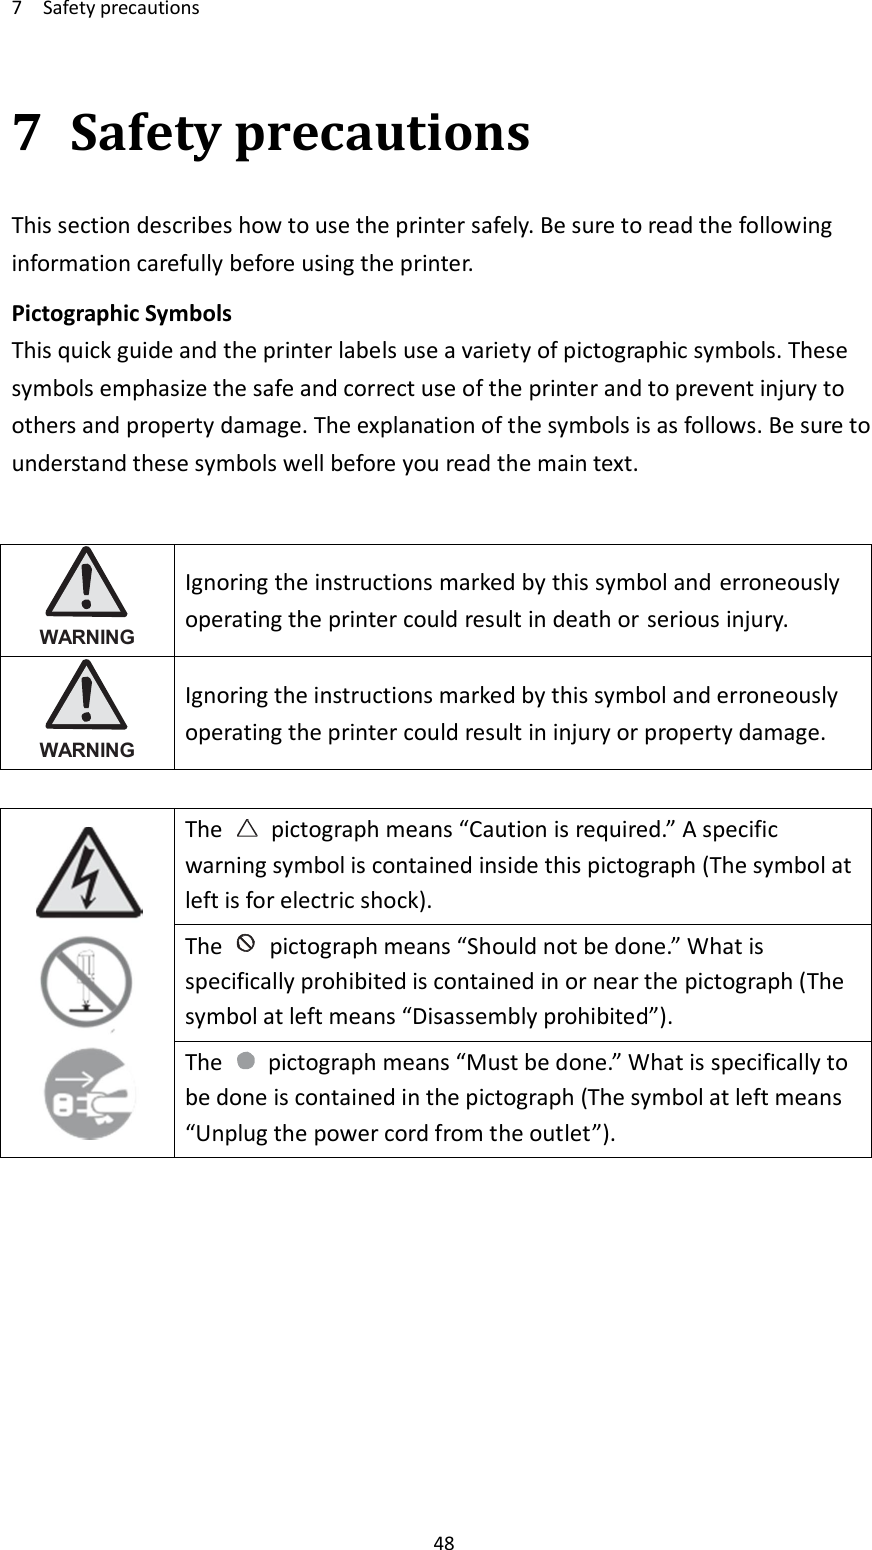 7    Safety precautions     48 7 Safety precautions This section describes how to use the printer safely. Be sure to read the following information carefully before using the printer. Pictographic Symbols This quick guide and the printer labels use a variety of pictographic symbols. These symbols emphasize the safe and correct use of the printer and to prevent injury to others and property damage. The explanation of the symbols is as follows. Be sure to understand these symbols well before you read the main text.   WARNING Ignoring the instructions marked by this symbol and erroneously operating the printer could result in death or serious injury.  WARNING Ignoring the instructions marked by this symbol and erroneously operating the printer could result in injury or property damage.   The    pictograph means “Caution is required.” A specific warning symbol is contained inside this pictograph (The symbol at left is for electric shock). The    pictograph means “Should not be done.” What is specifically prohibited is contained in or near the pictograph (The symbol at left means “Disassembly prohibited”). The    pictograph means “Must be done.” What is specifically to be done is contained in the pictograph (The symbol at left means “Unplug the power cord from the outlet”).          